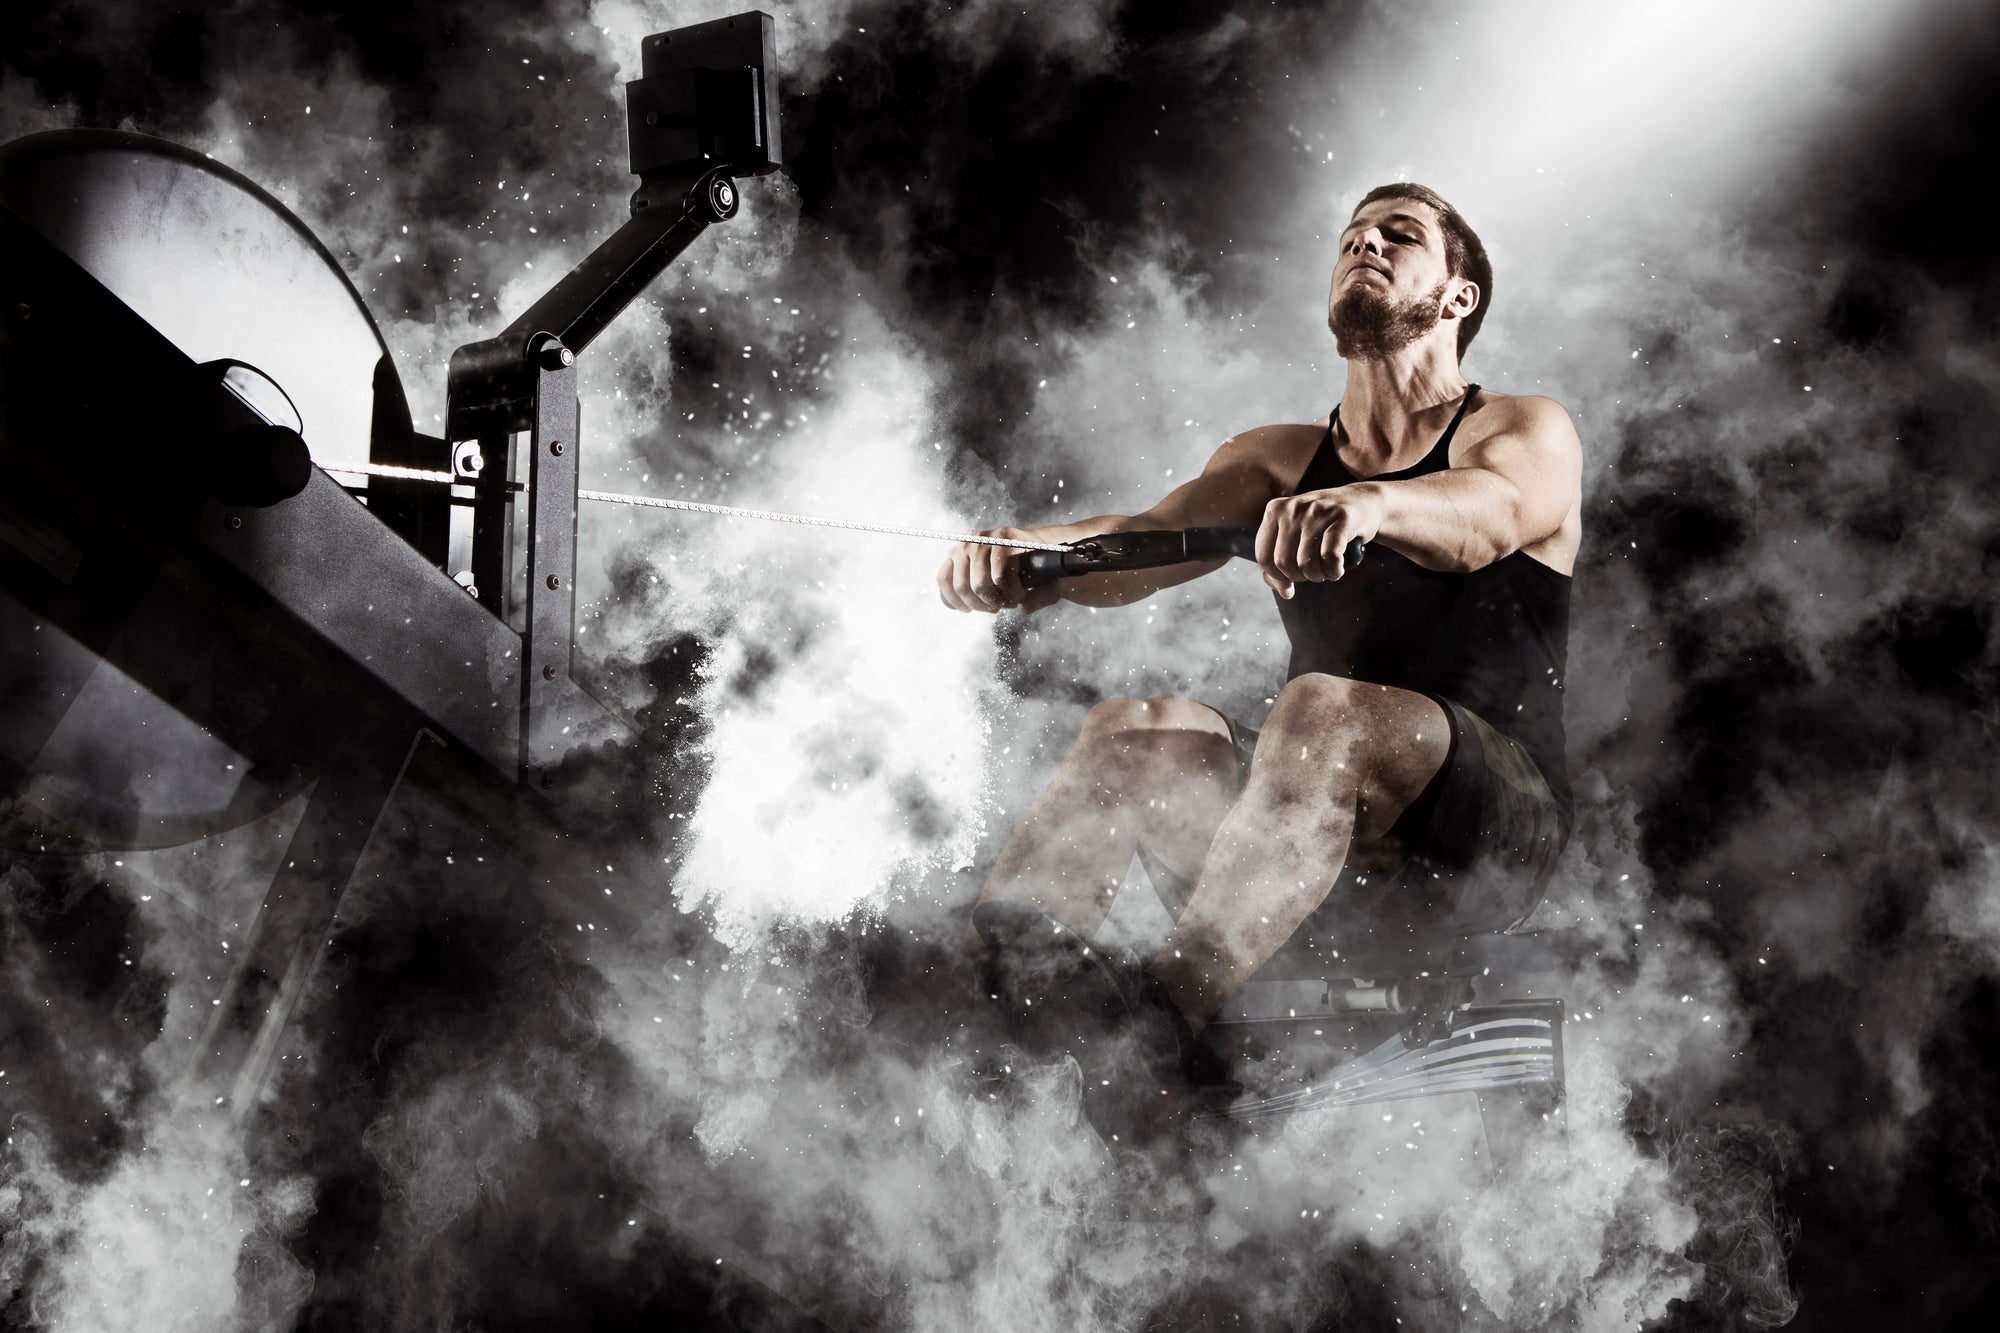 Rowing Machine Vs Treadmill: Which is Better and Why? 